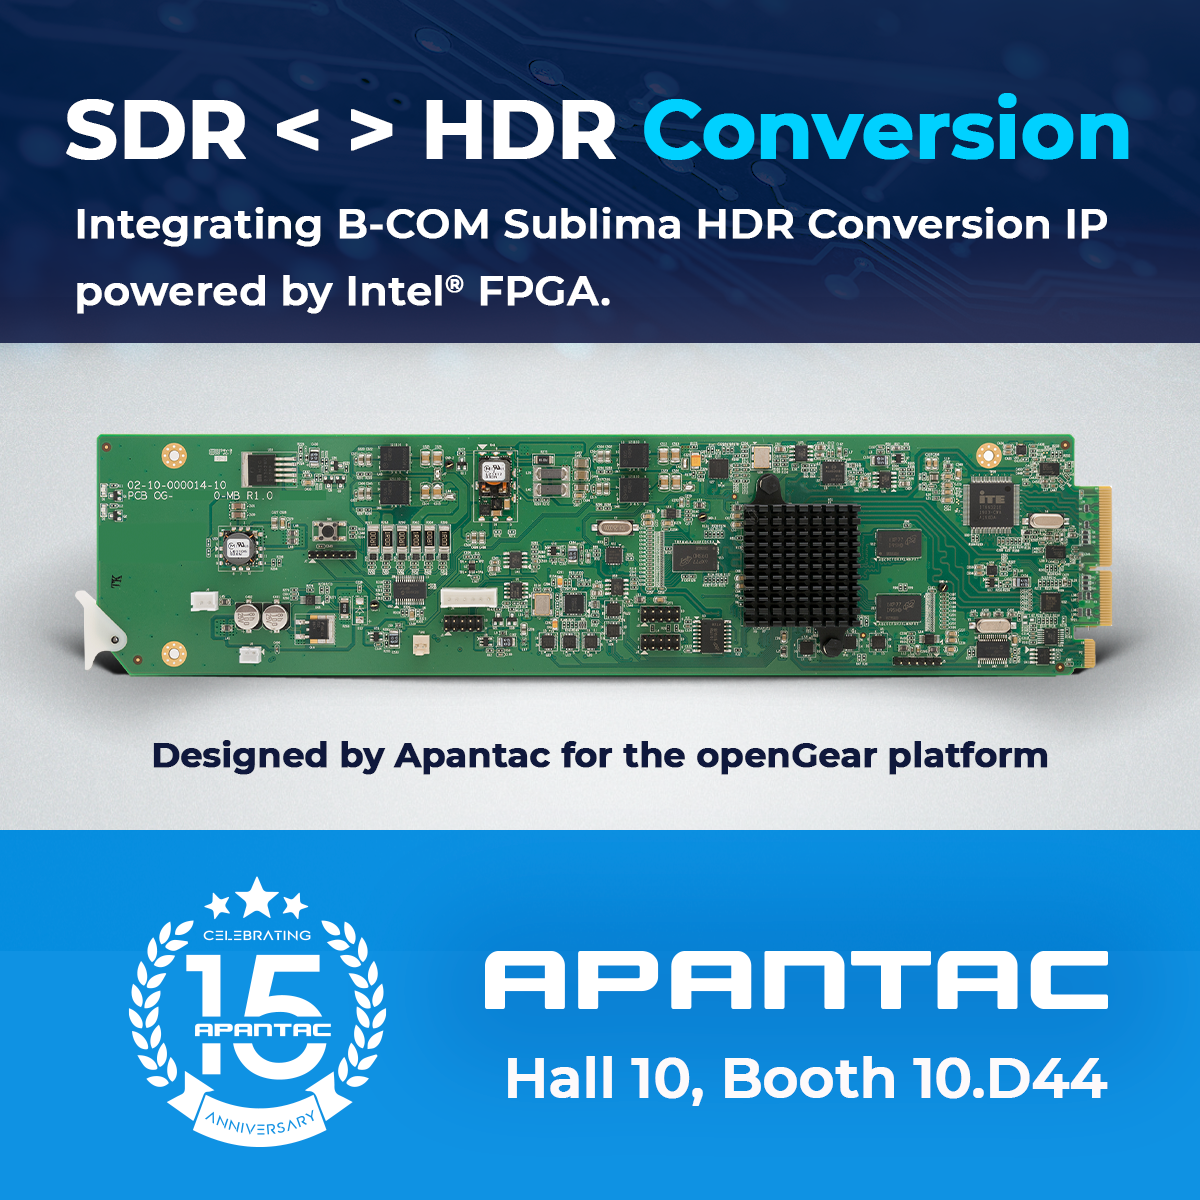 SDR-HDR-Conversion